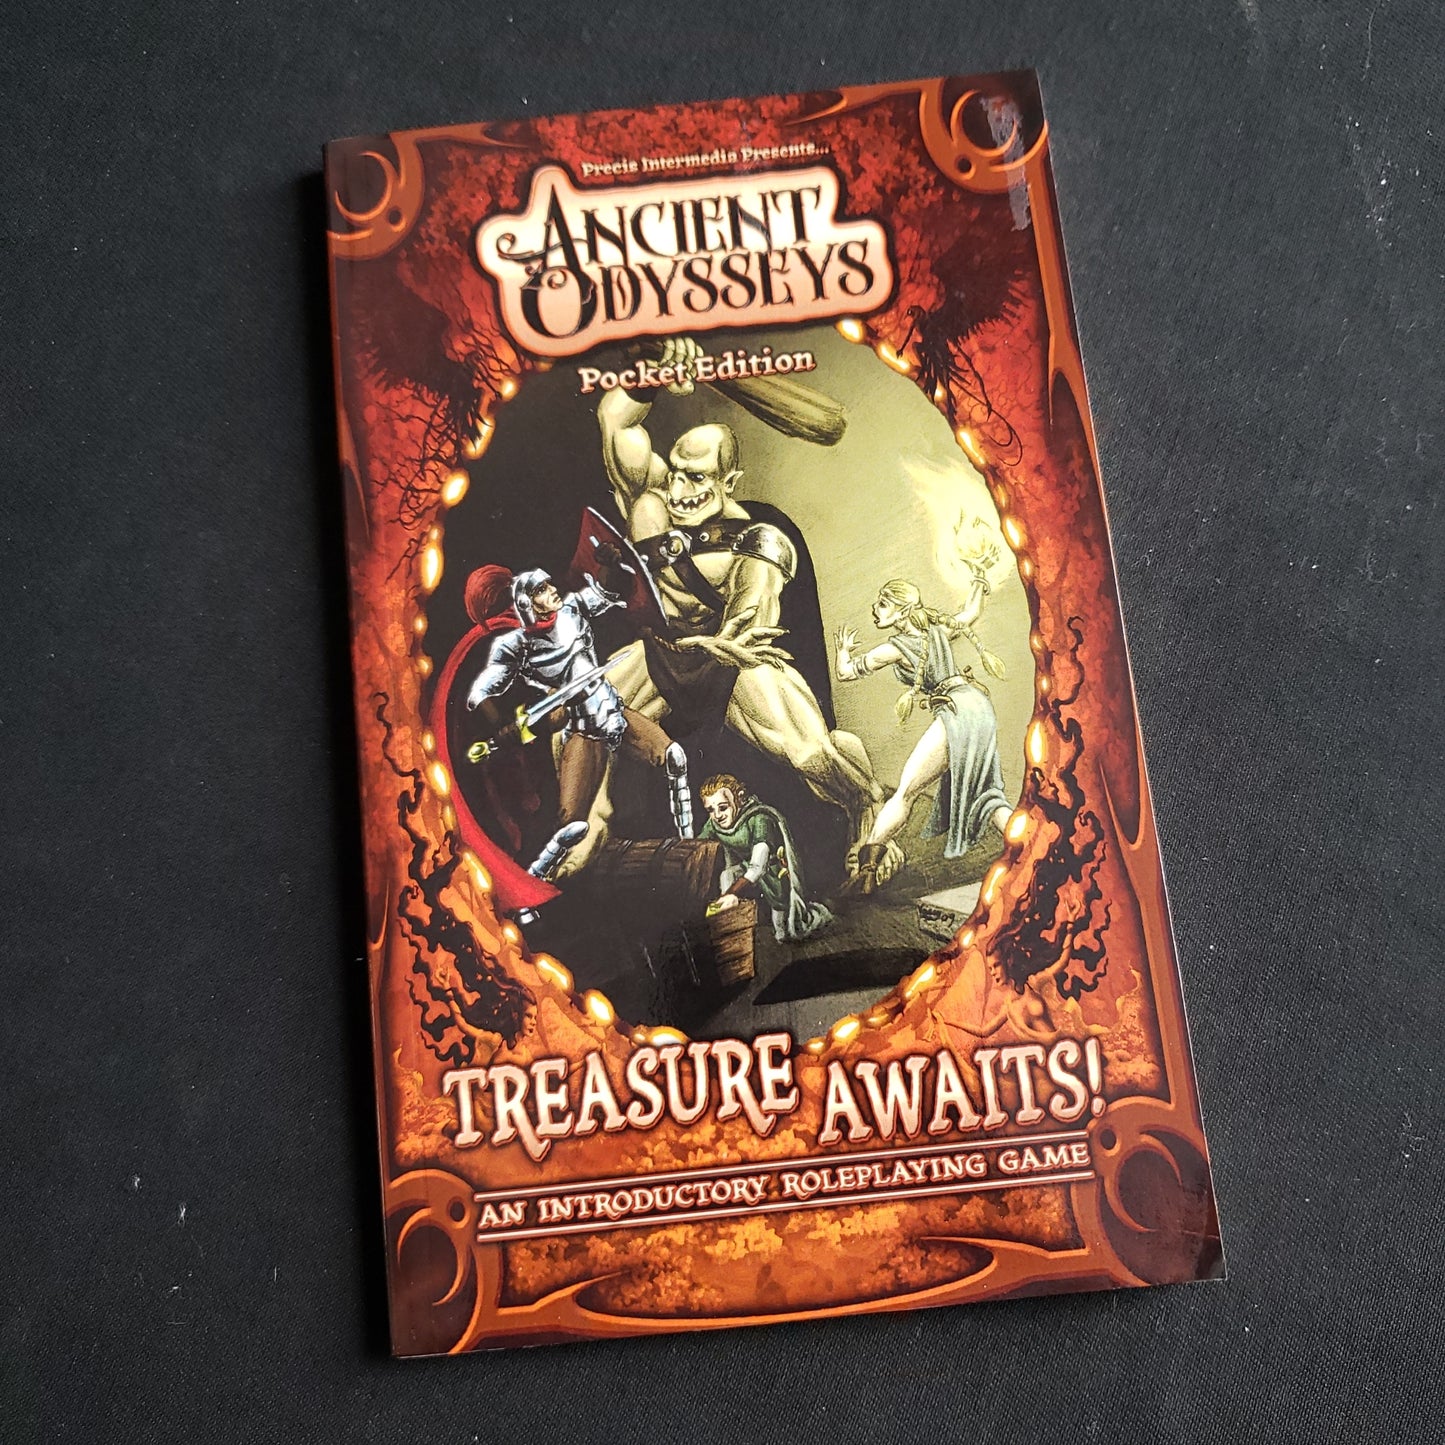 Image shows the front cover of the Ancient Odysseys: Treasure Awaits! Pocket Edition roleplaying game book